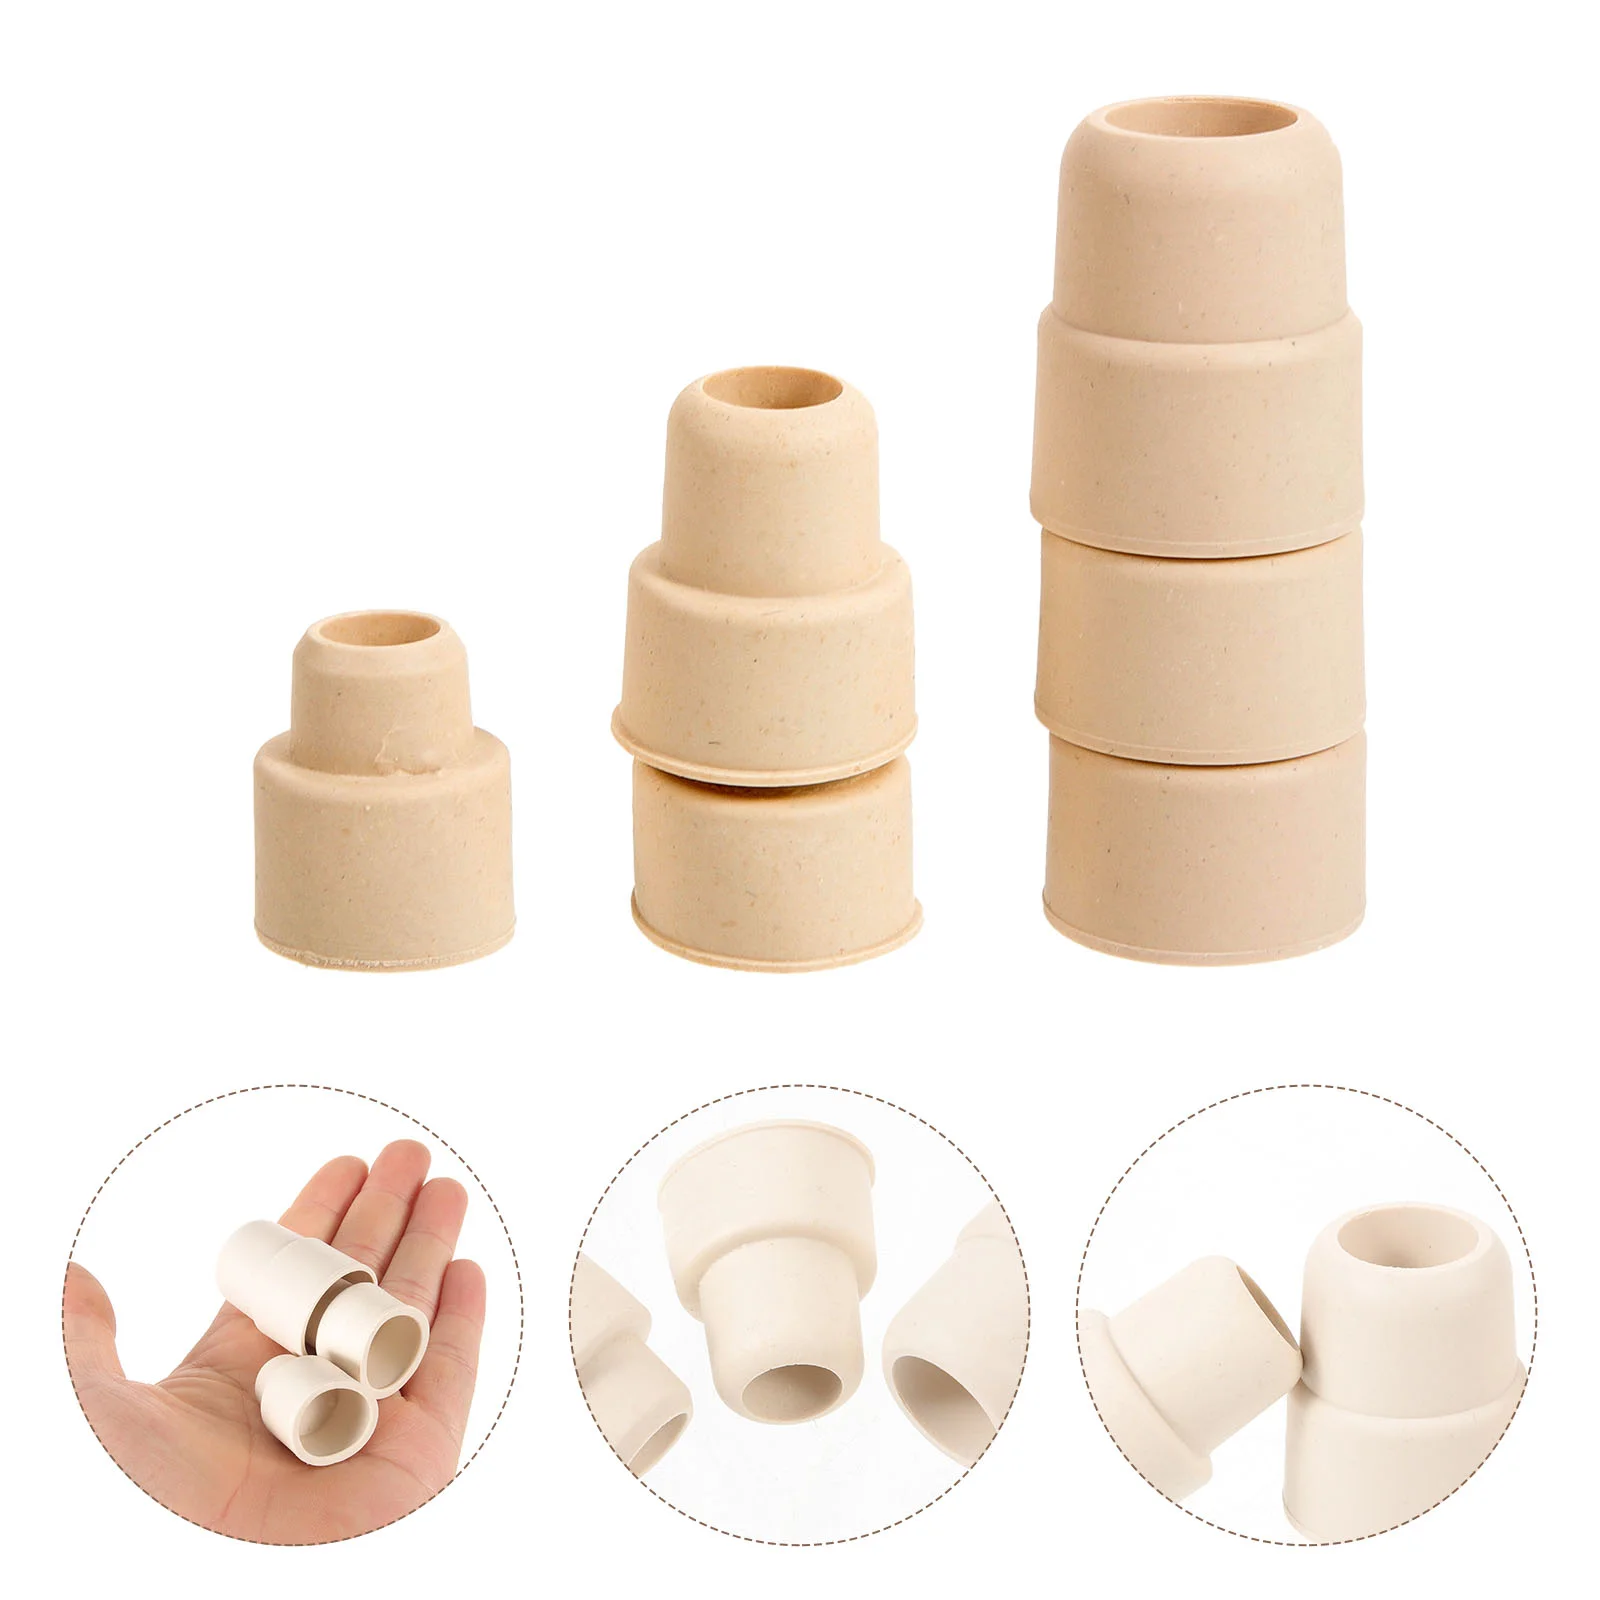 

30Pcs Rubber Plugs Compact Rubber Stoppers Household Jug Stoppers Bottle Plugs